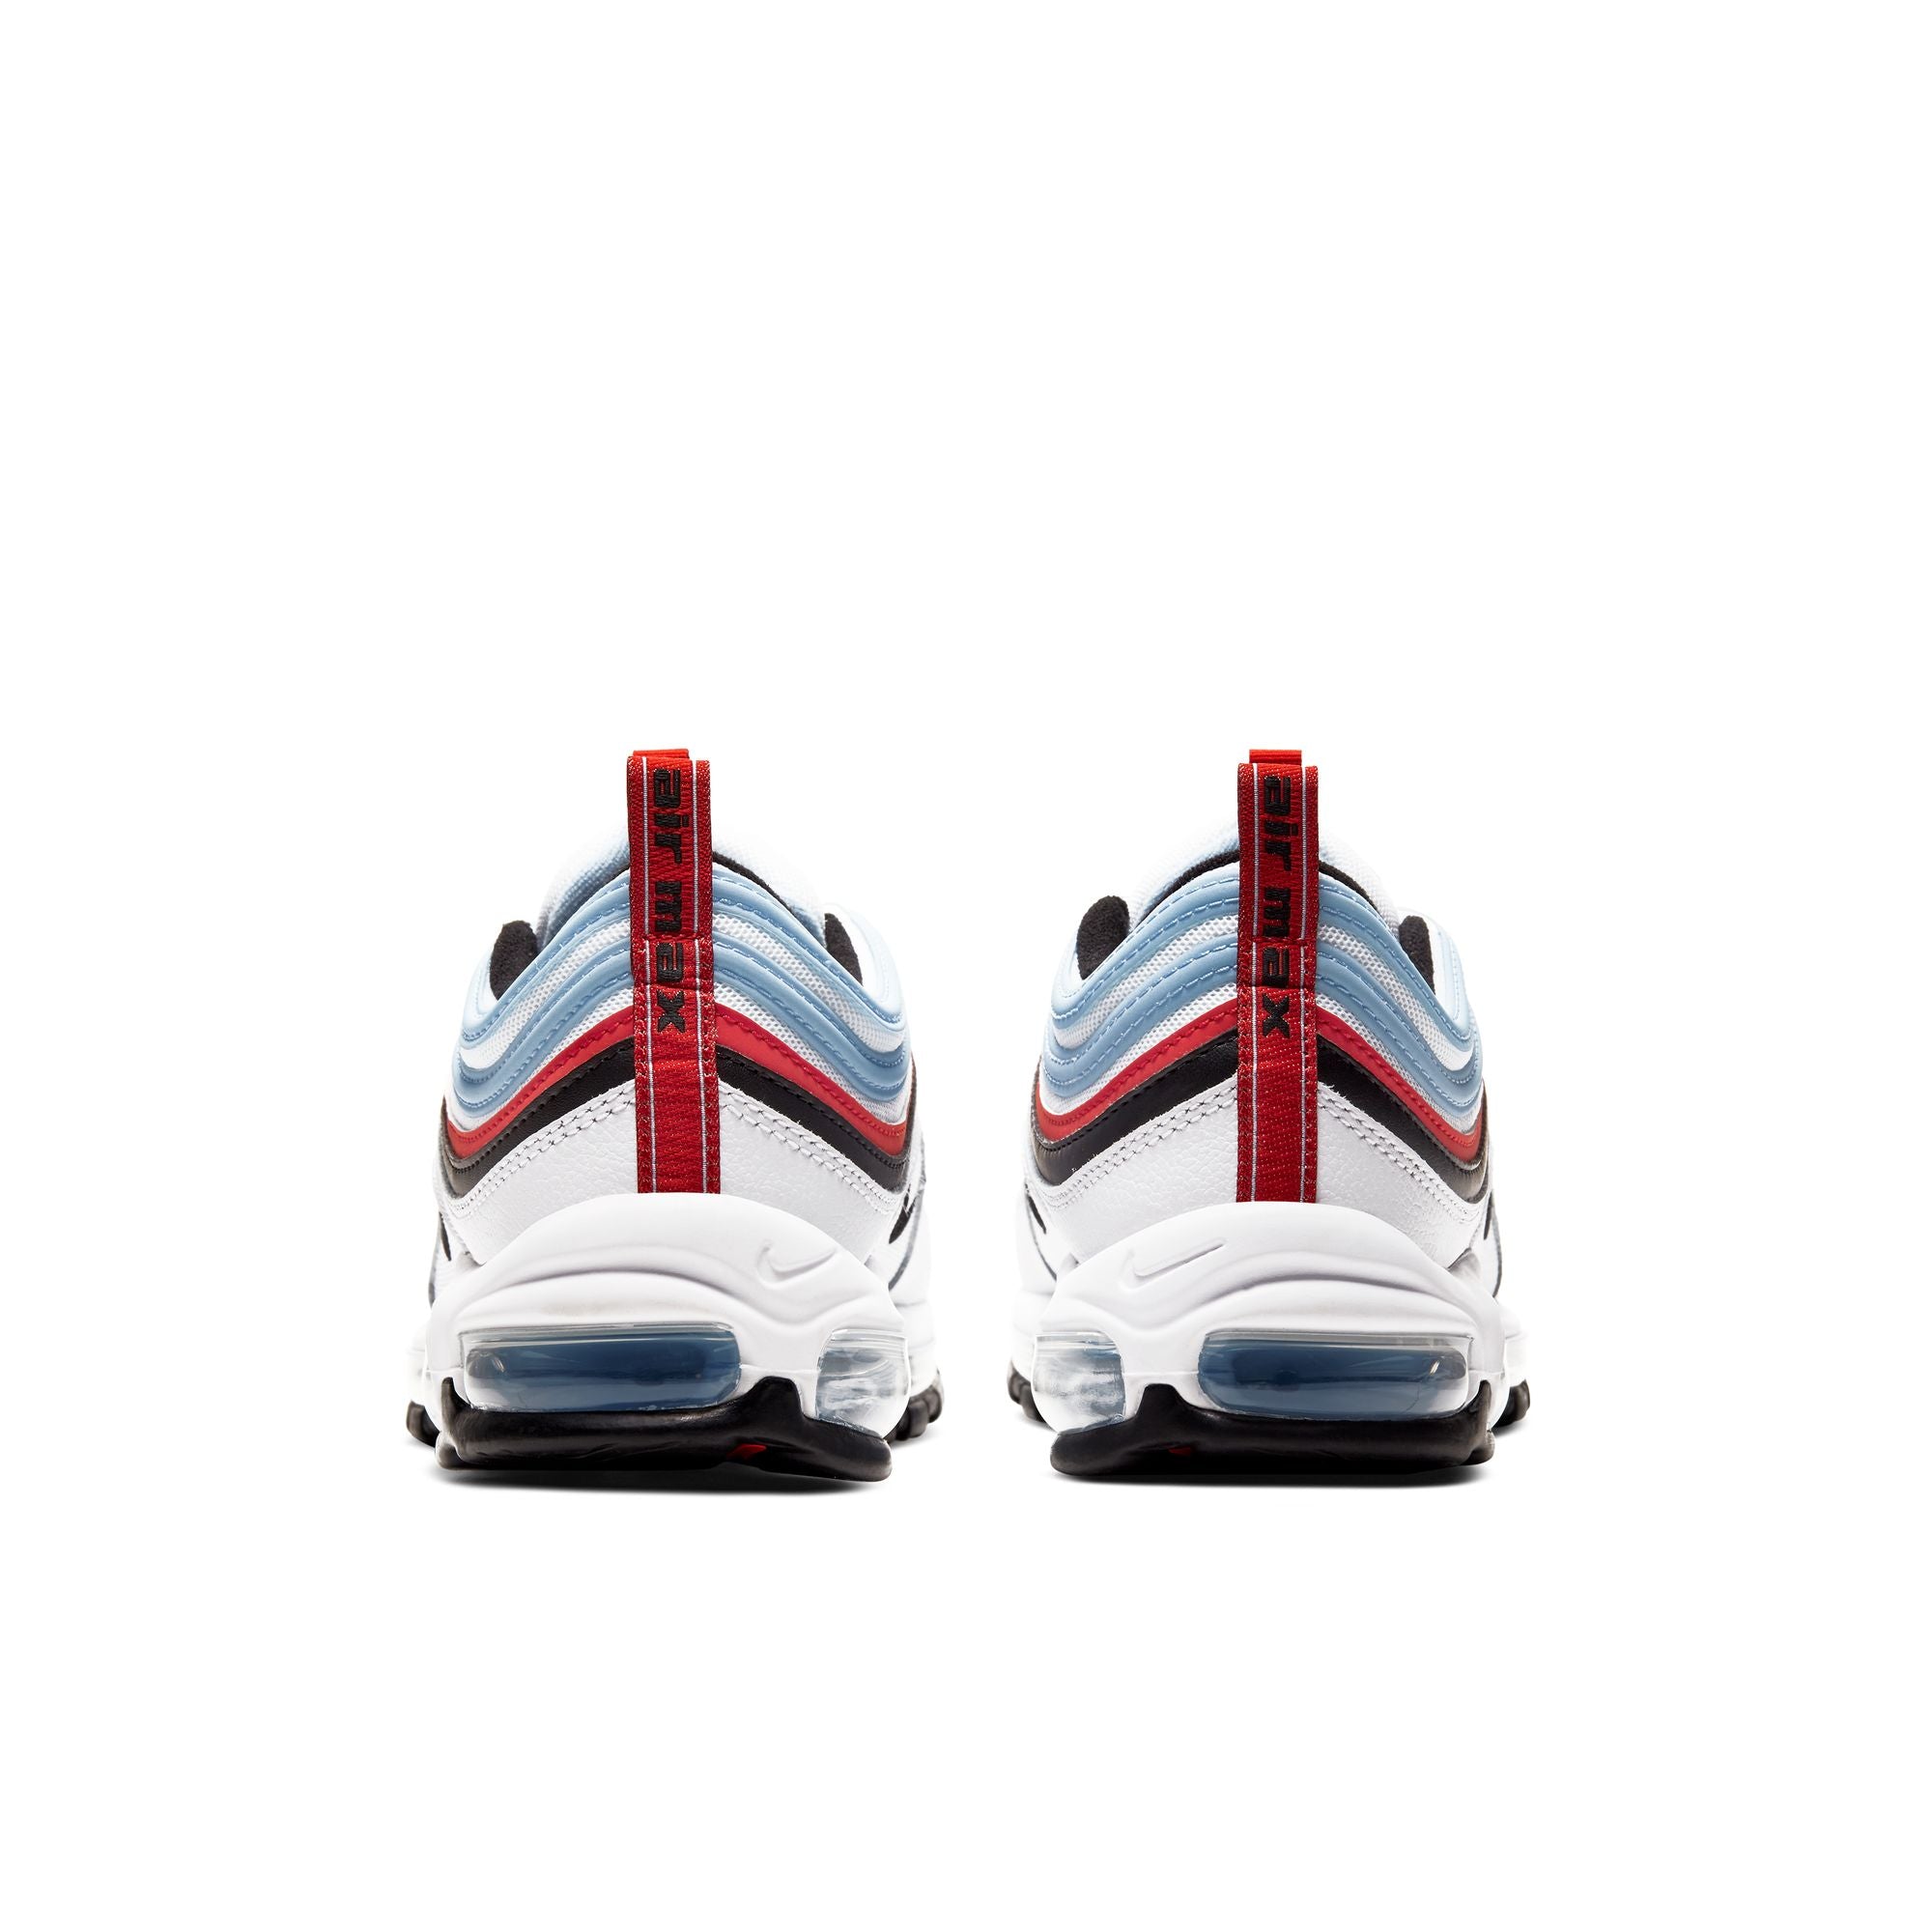 Nike Air Max 97 "Chicago" Men's Shoes